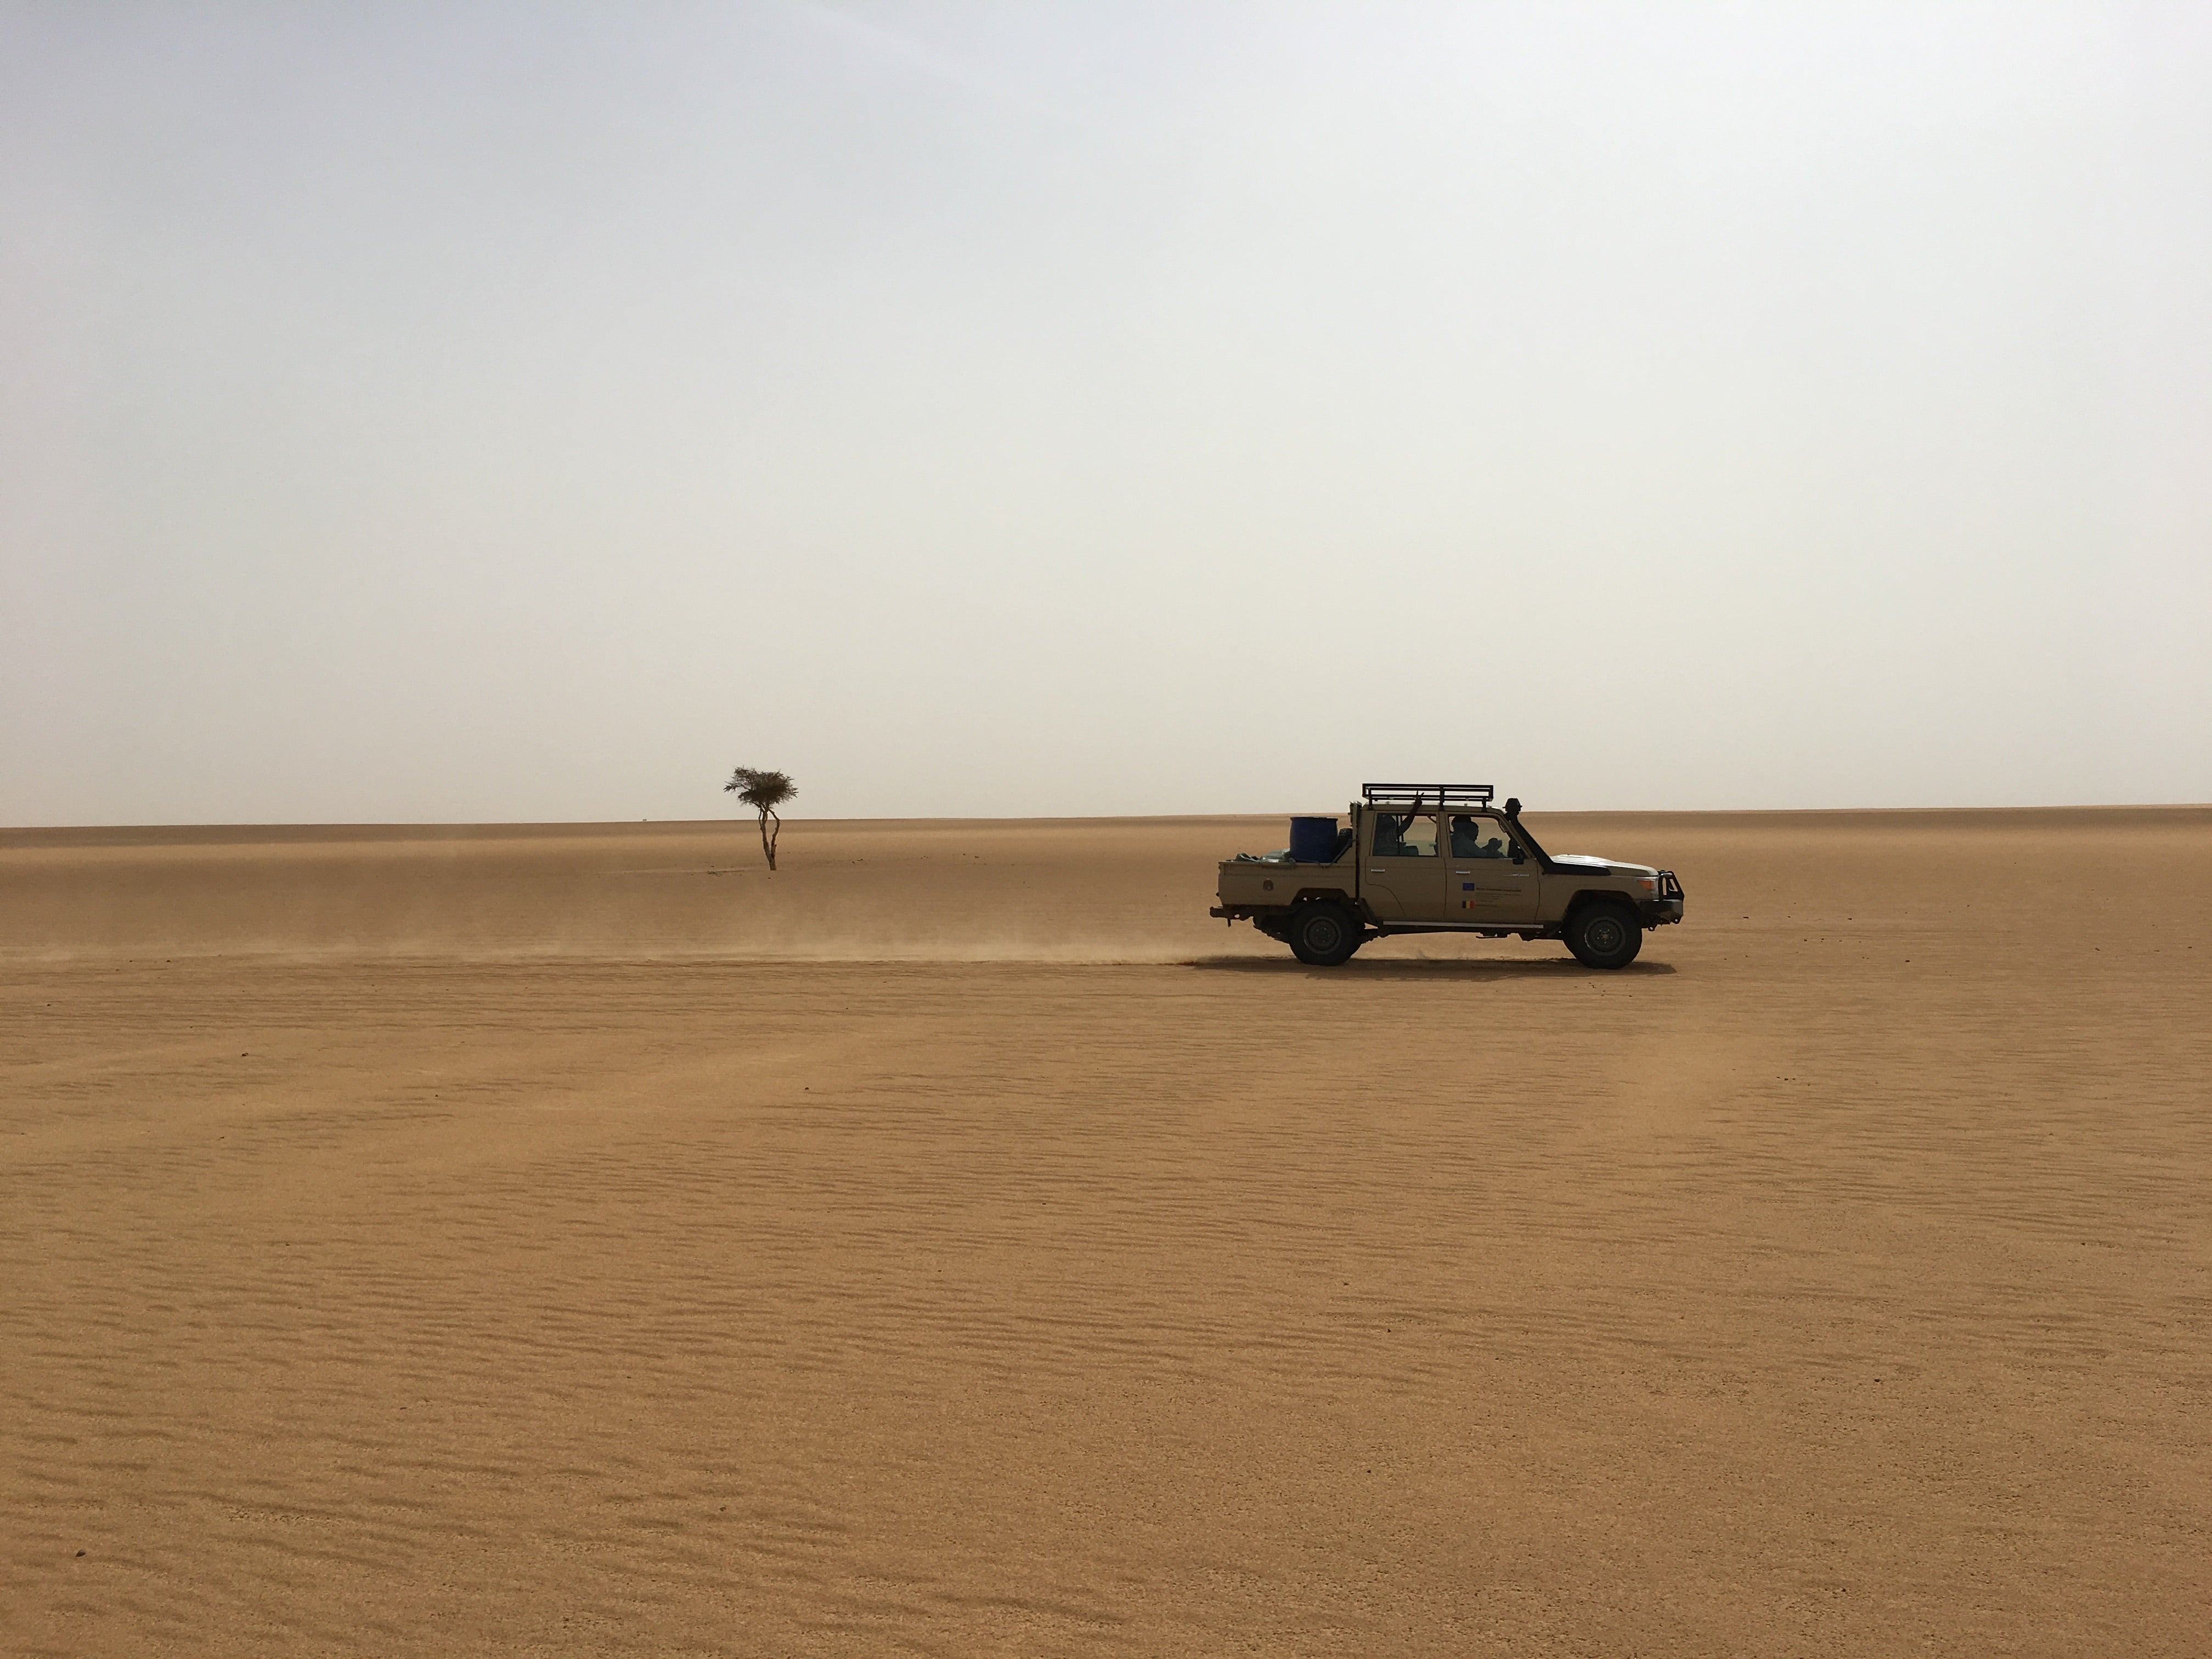 A photo of a jeep driving across the desert. A single tree stands out against the flat landscape.